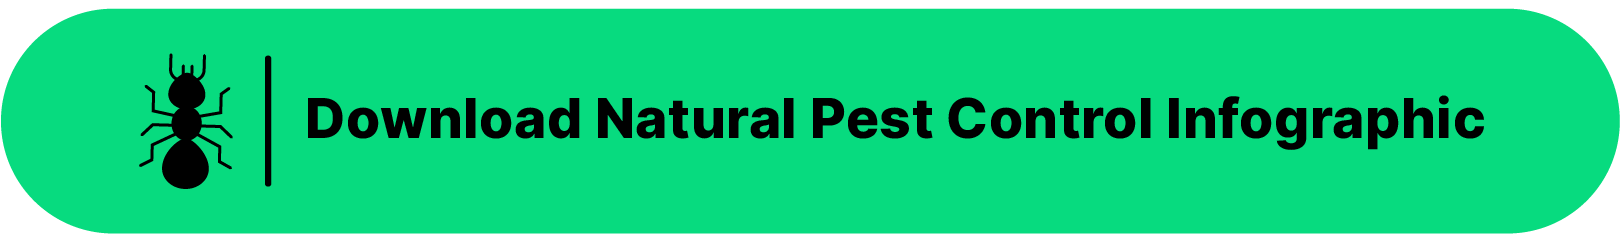 Green download button with an ant on the left that reads "Download Natural Pest Control Infographic"